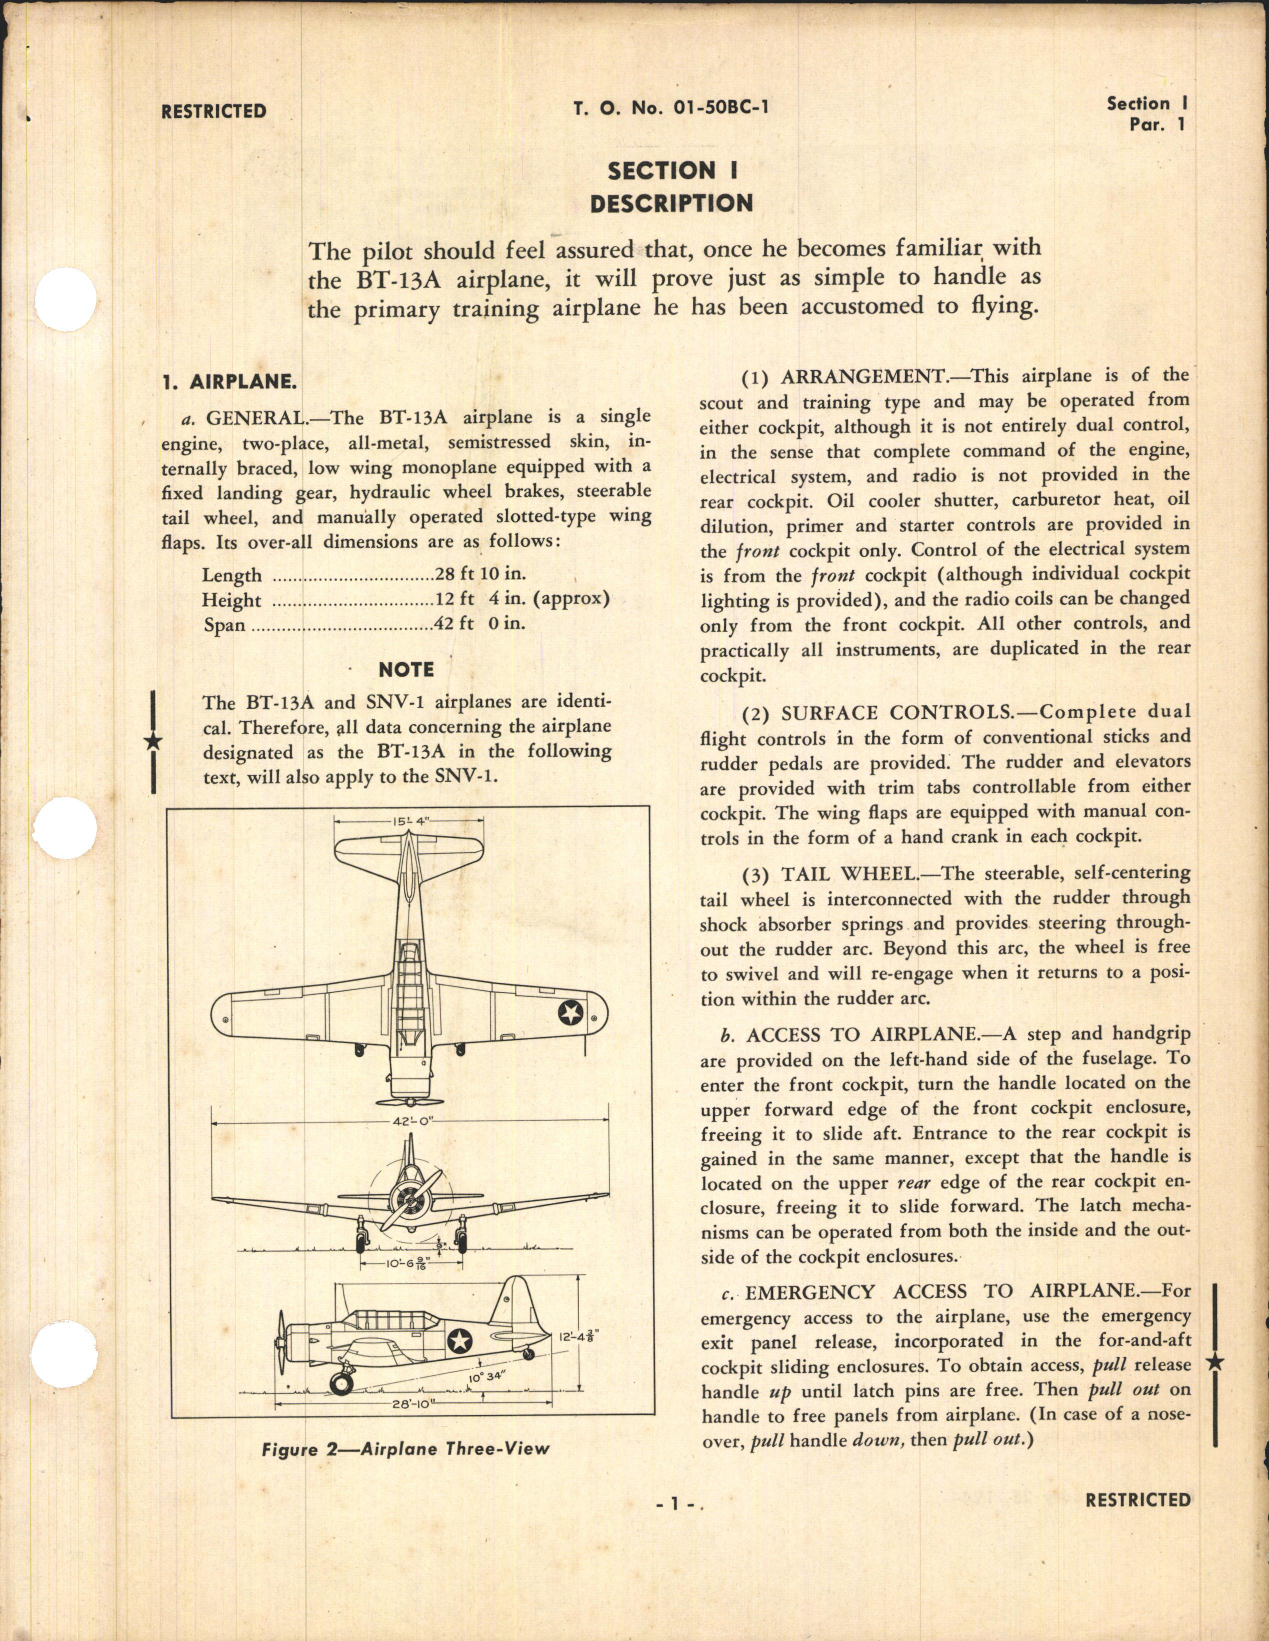 Sample page 5 from AirCorps Library document: Pilot's Flight Operating Instructions for BT-13A and SNV-1 Airplanes